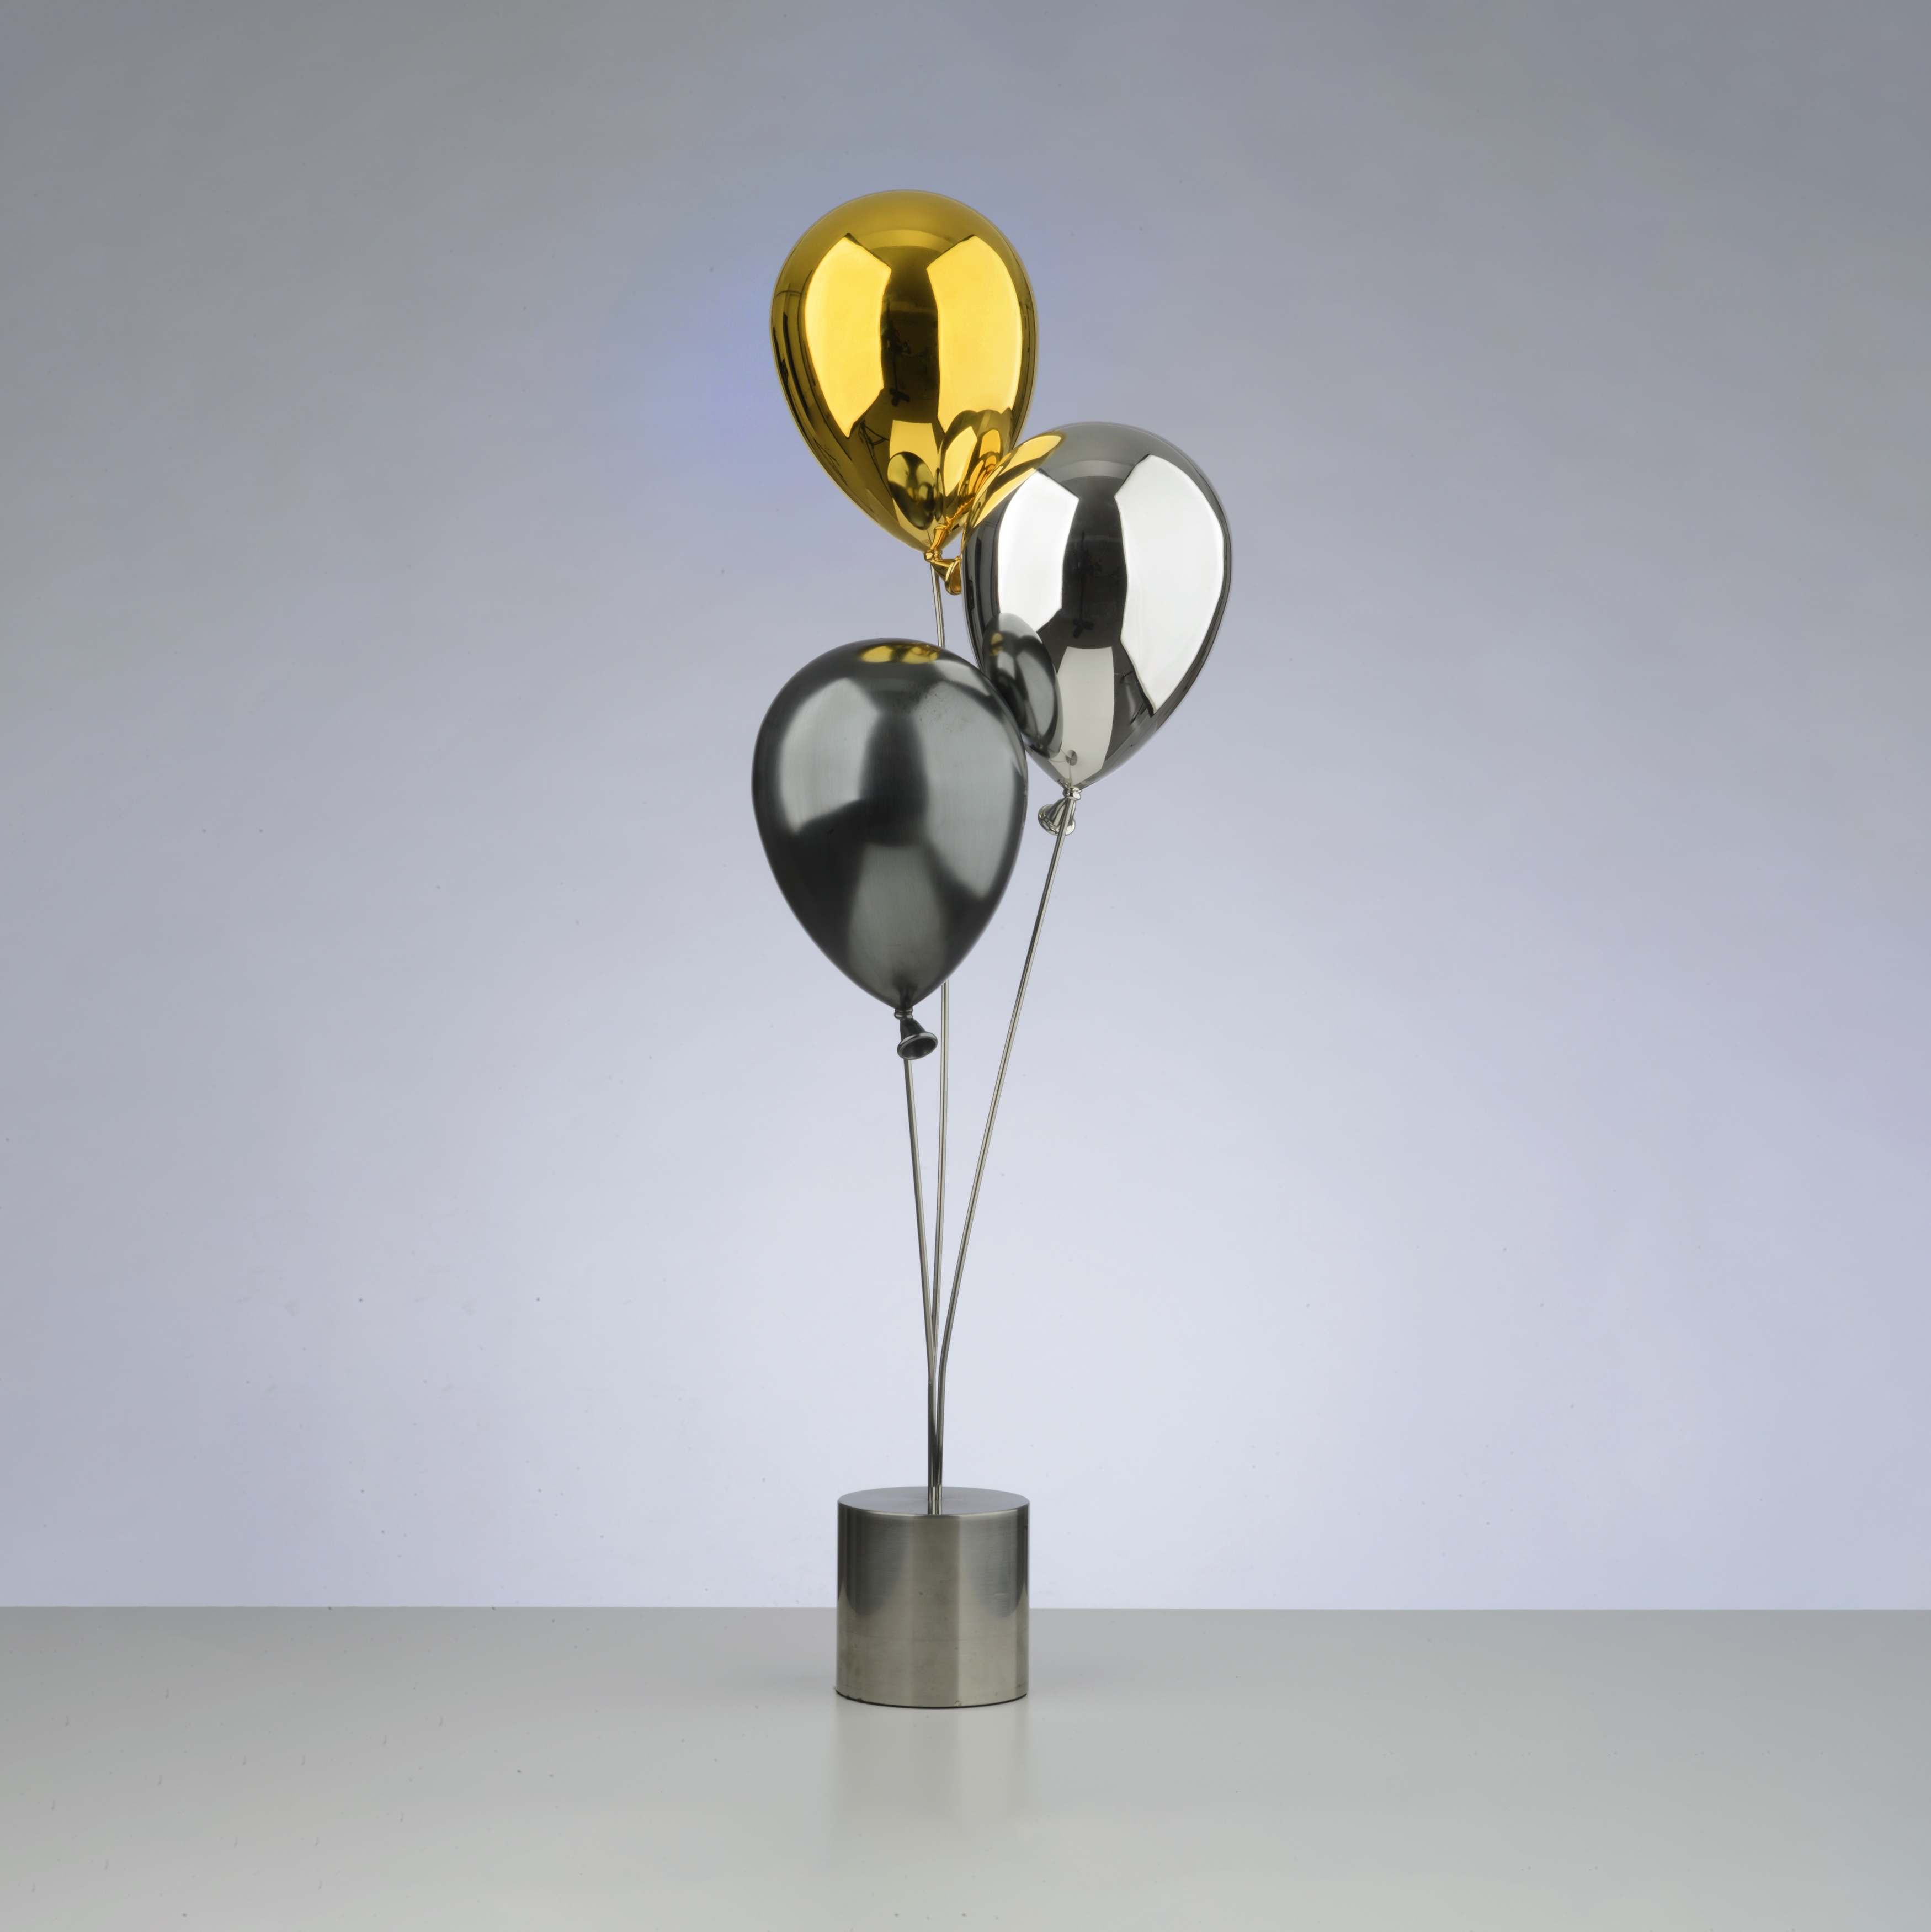 The Balloon Centrepiece by James Dougall